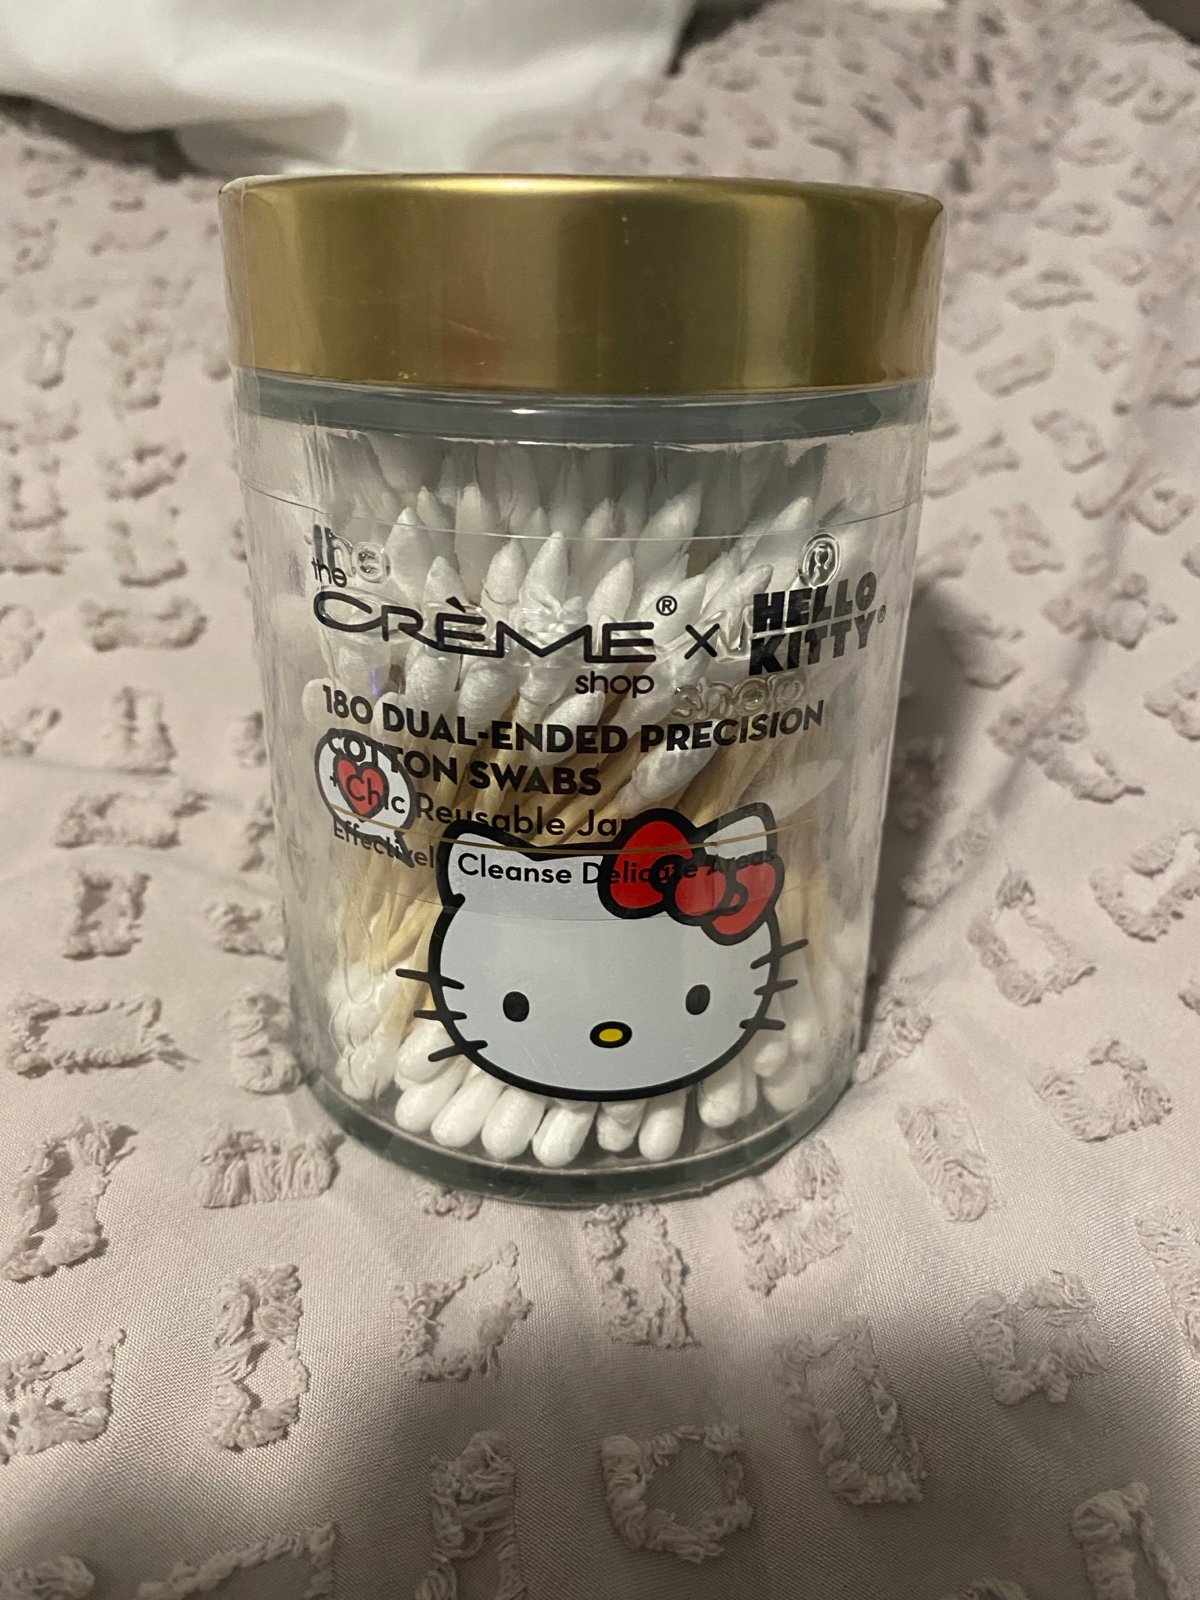 Hello Kitty180 dual ended cotton swabs Hello Kitty glass container Ay3v9YUQE